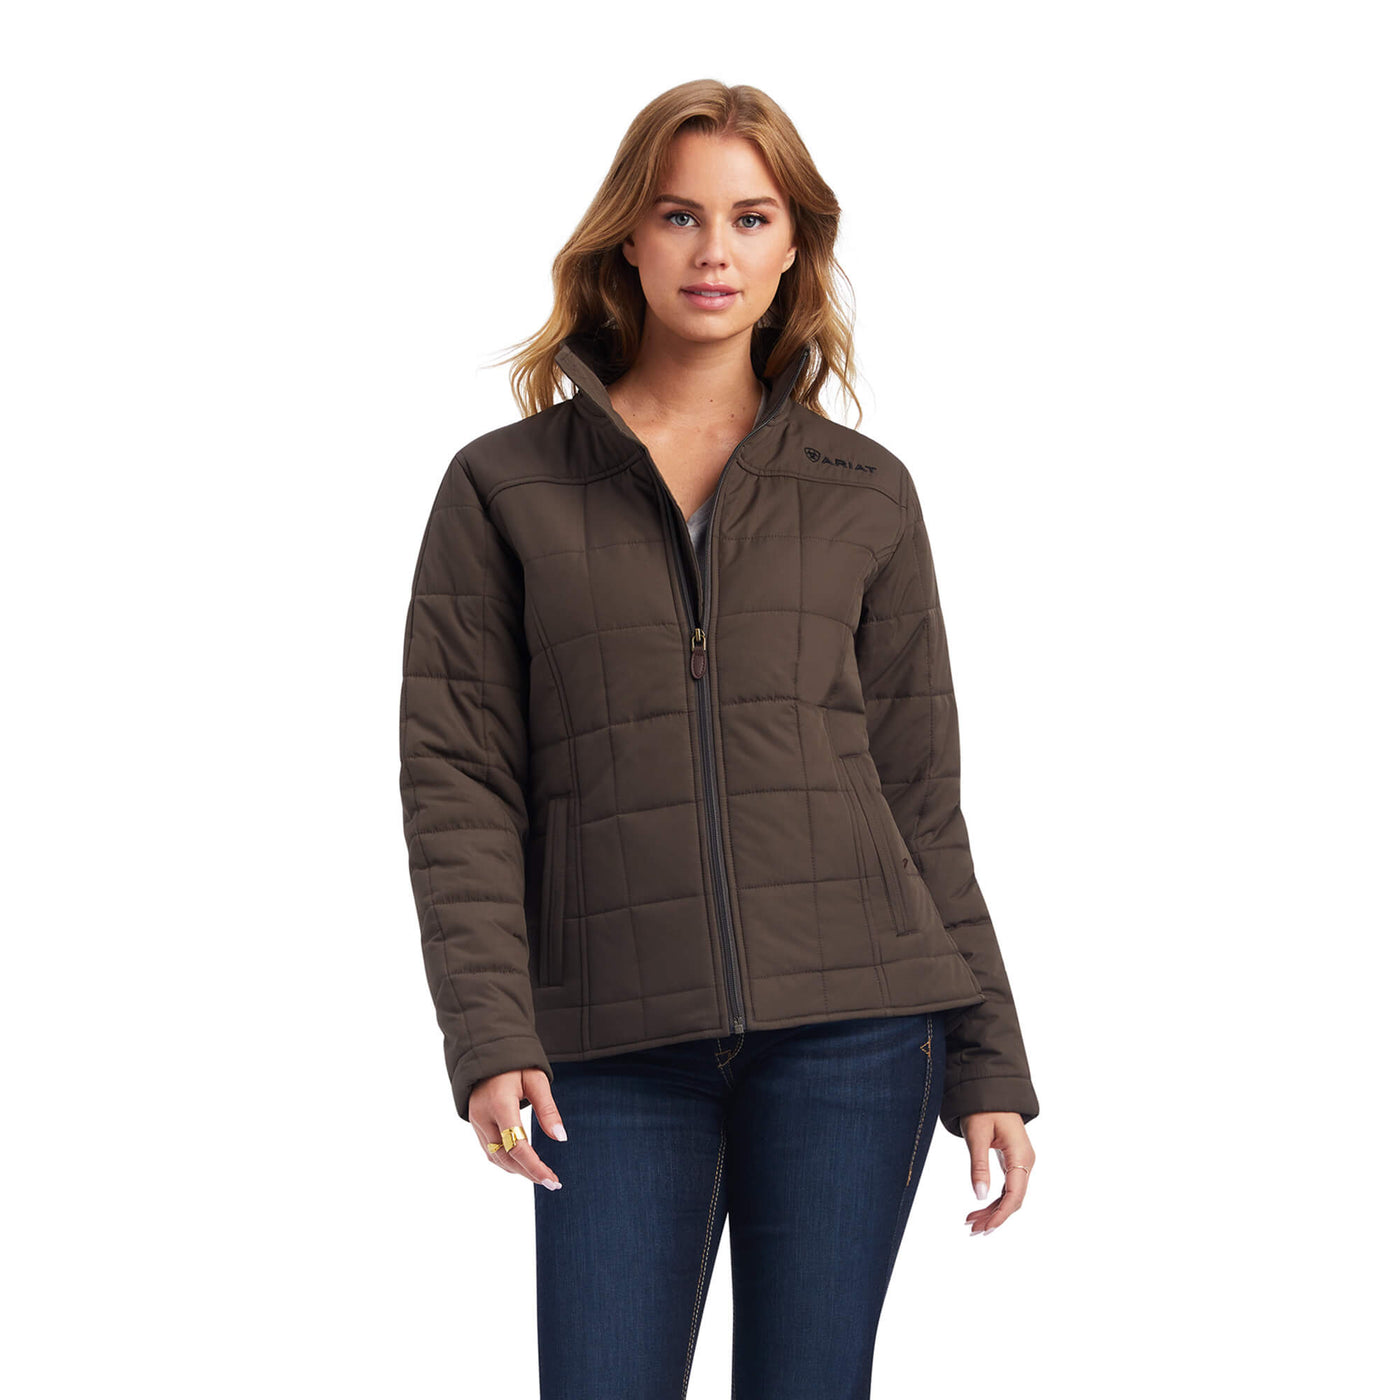 Crius Conceal Carry Jacket